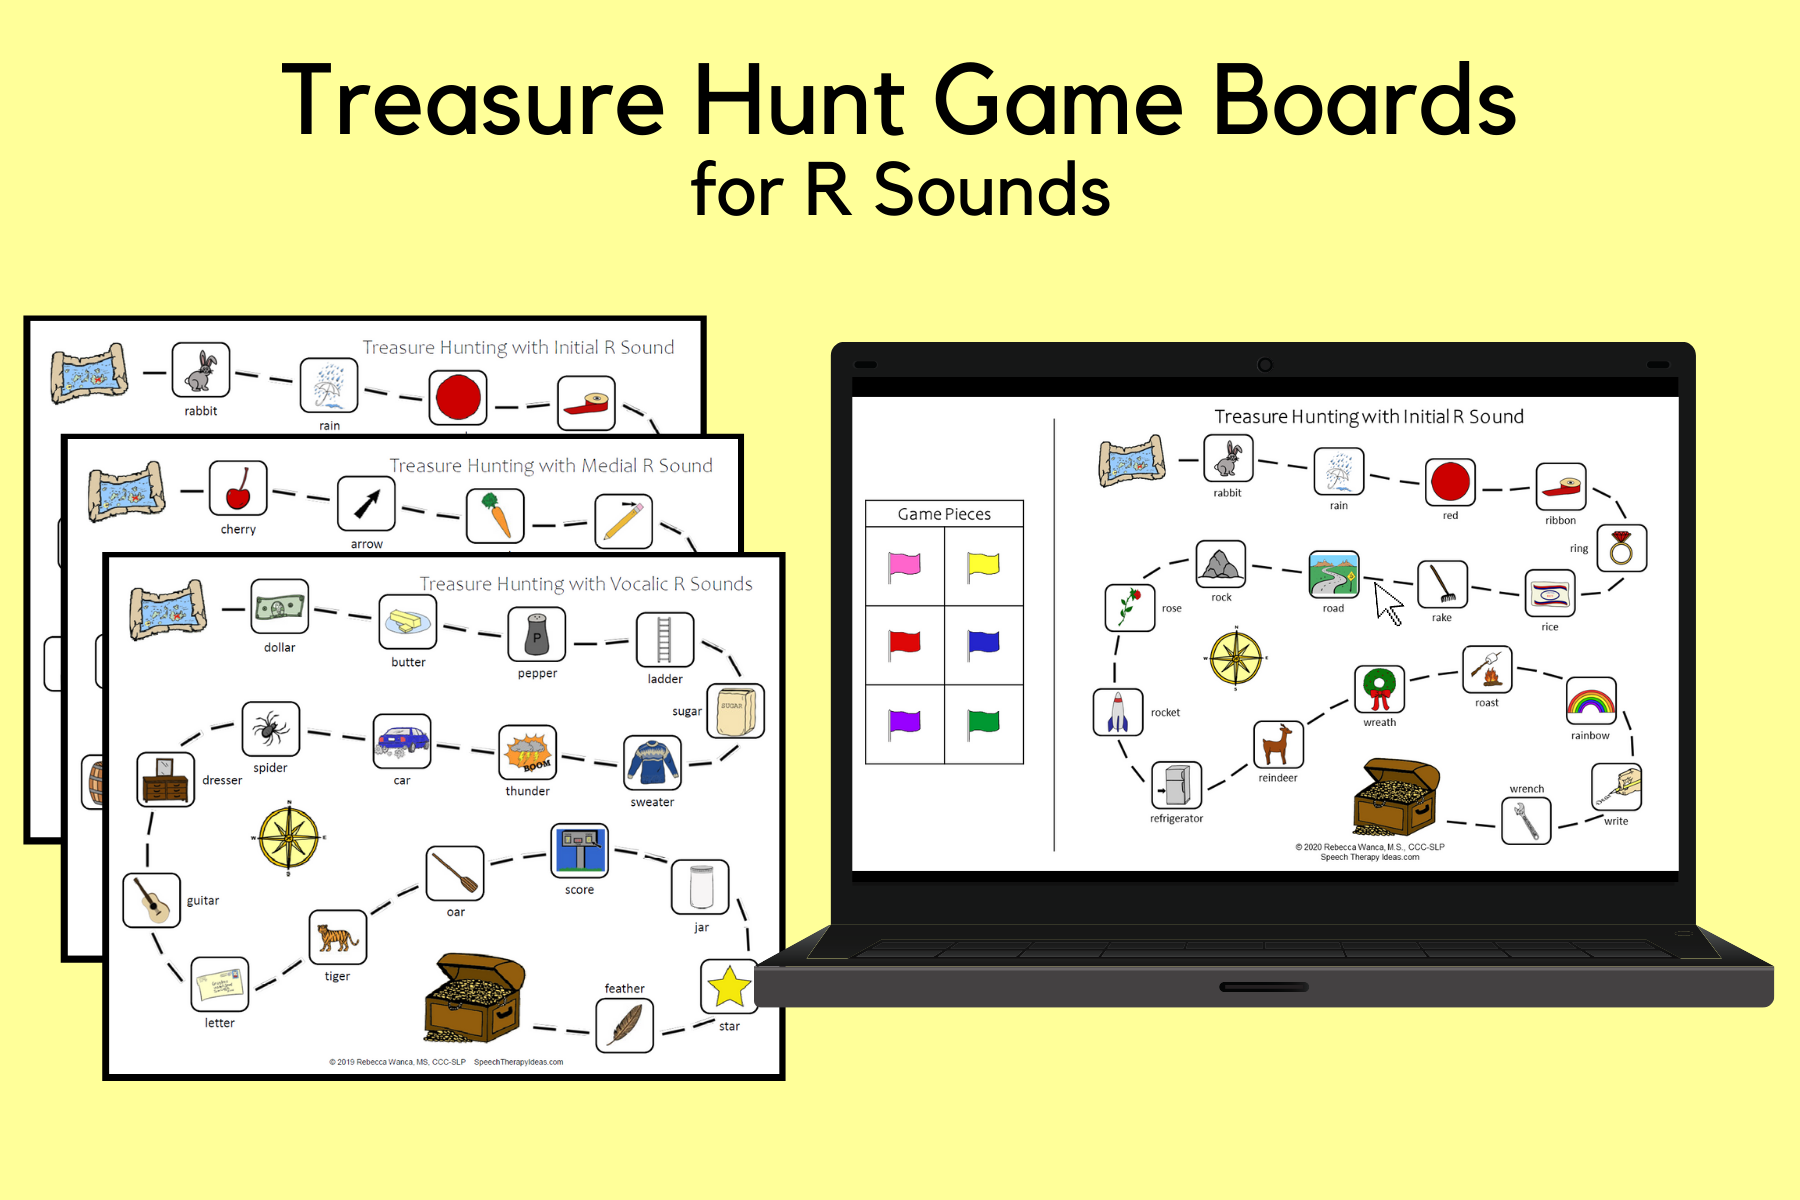 Treasure Hunt Game Boards for R Sounds